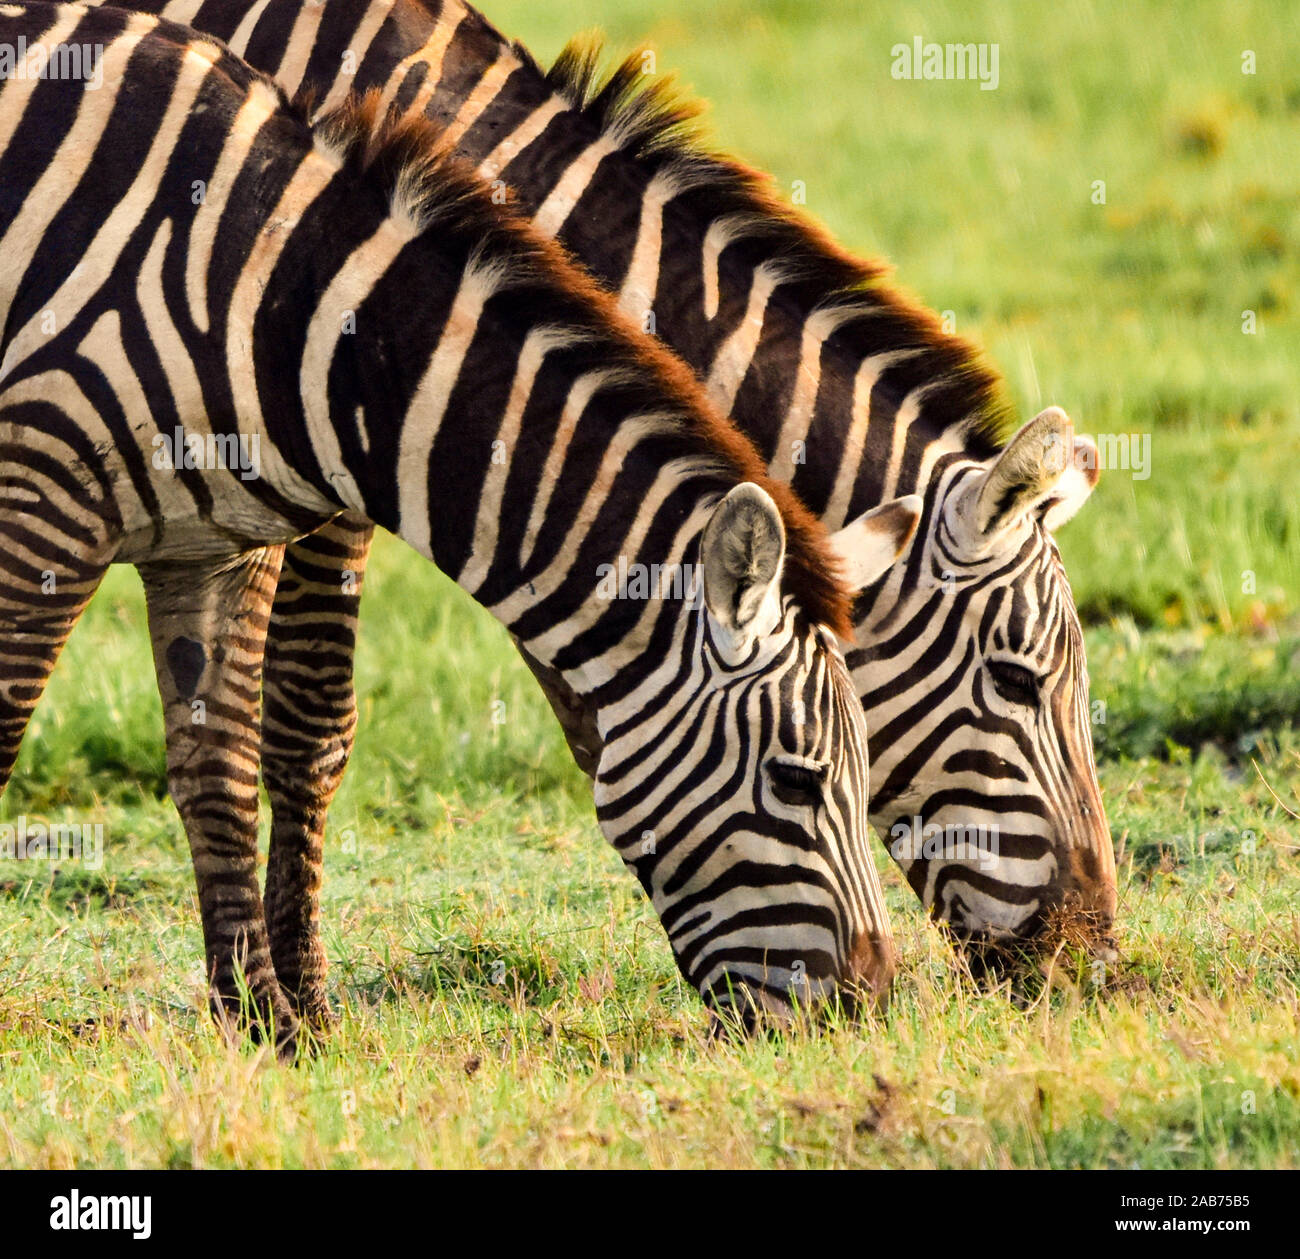 Close-up of two zebras (Equus burchelli) grazing side by side on lush grass in Amboseli National Park in Kenya. Stock Photo